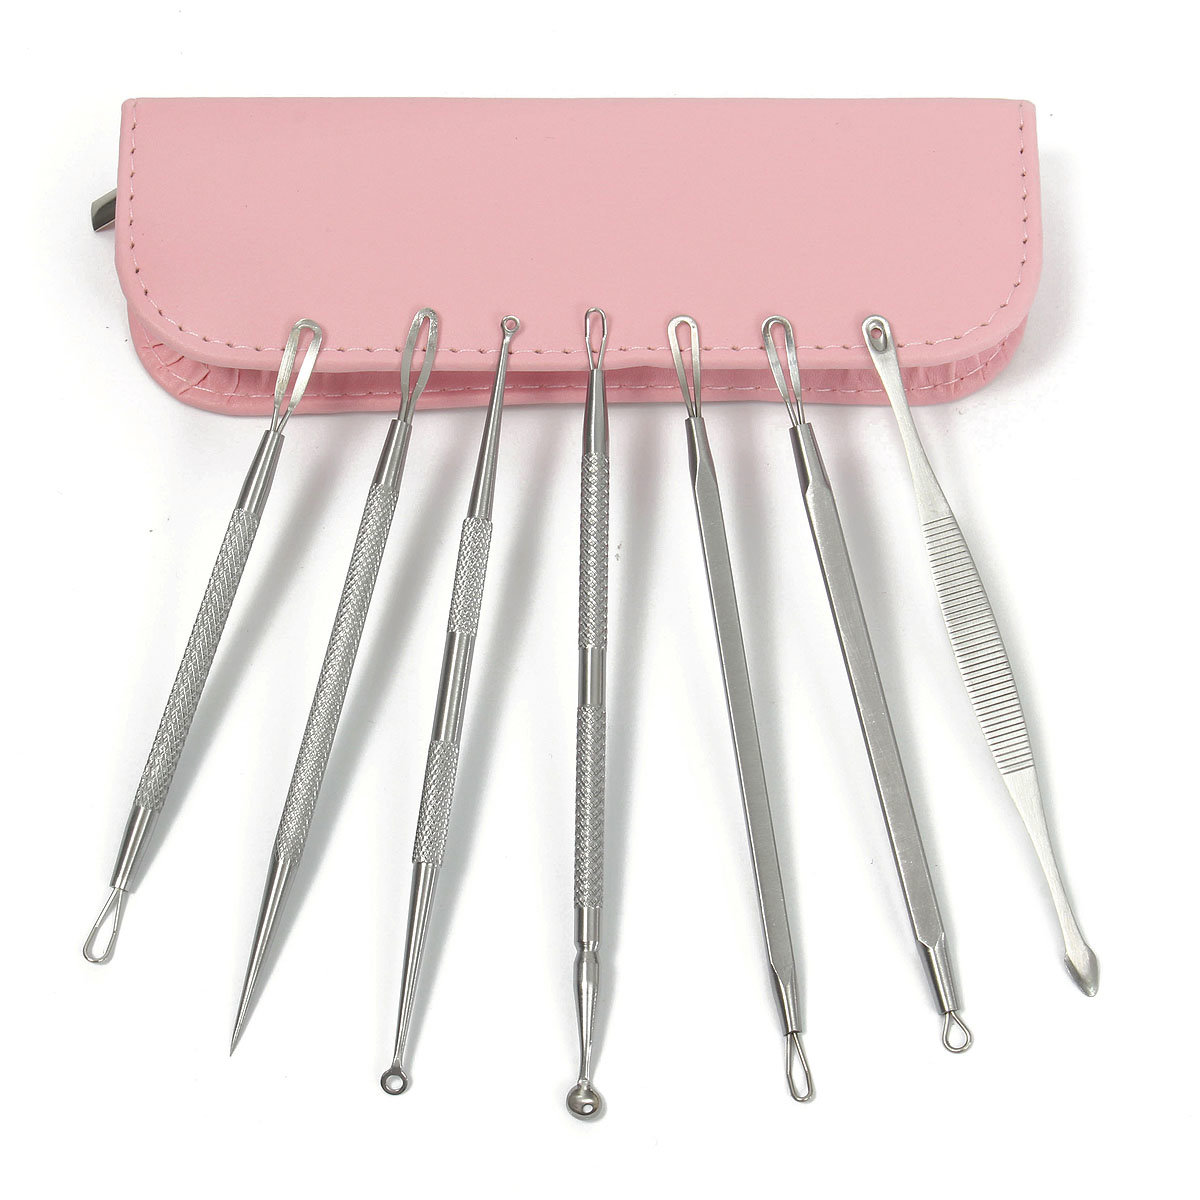 7Pcs Multipurpose Acne Blackhead Comedone Remover Extractor Stainless Steel Tool With Pink Bag 